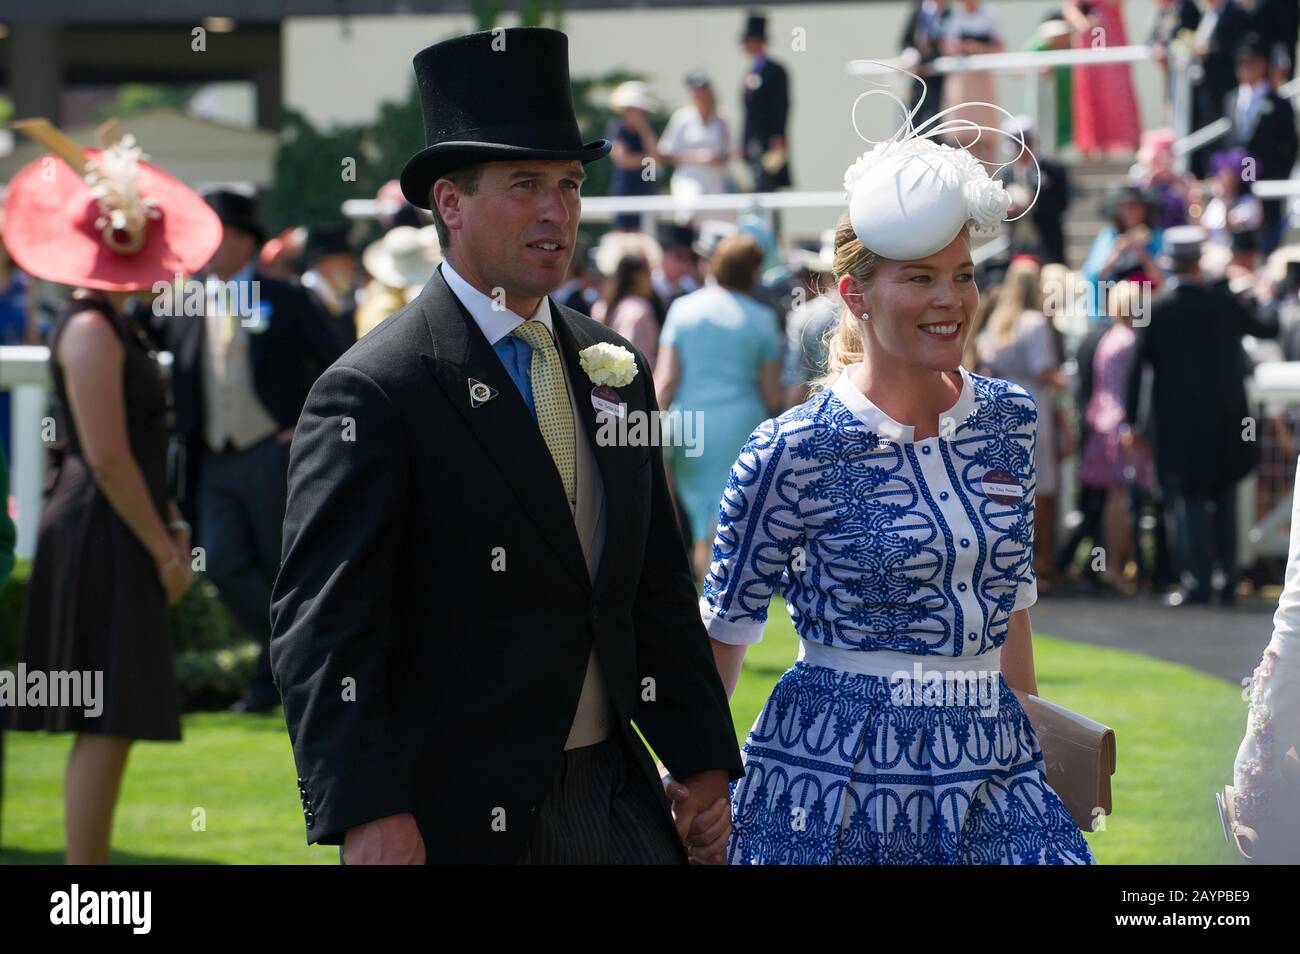 Royal Ascot, Ascot Racecourse, Berkshire, UK. 20th June, 2017. Her Majesty the Queen's eldest grandson Peter Phillips attends Day One of Royal Ascot with his wife Autumn Phillips. Credit: Maureen McLean/Alamy Stock Photo